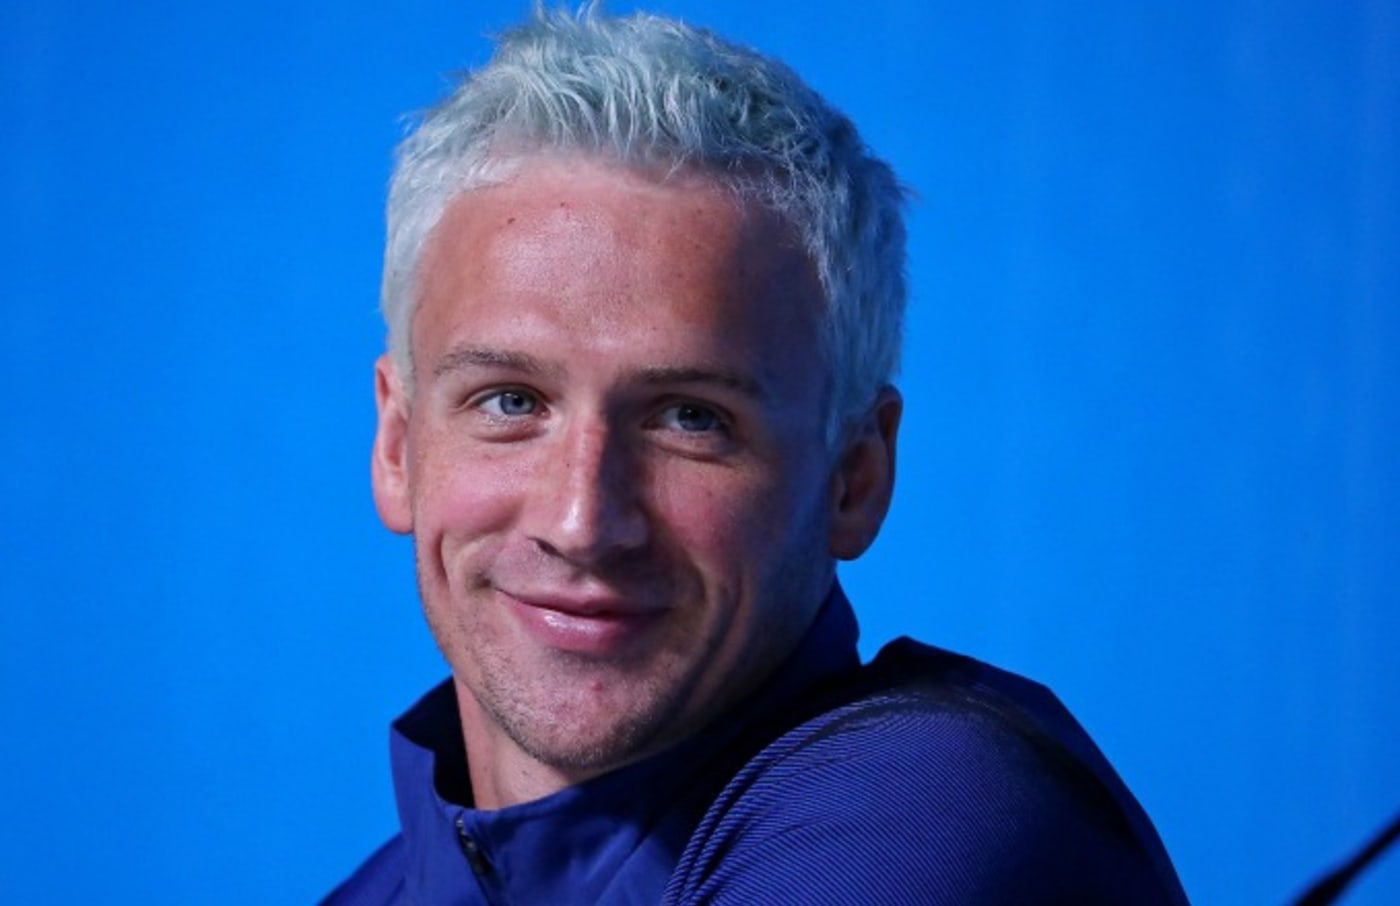 Ryan Lochte signs new endorsement deal with Pine Brothers.